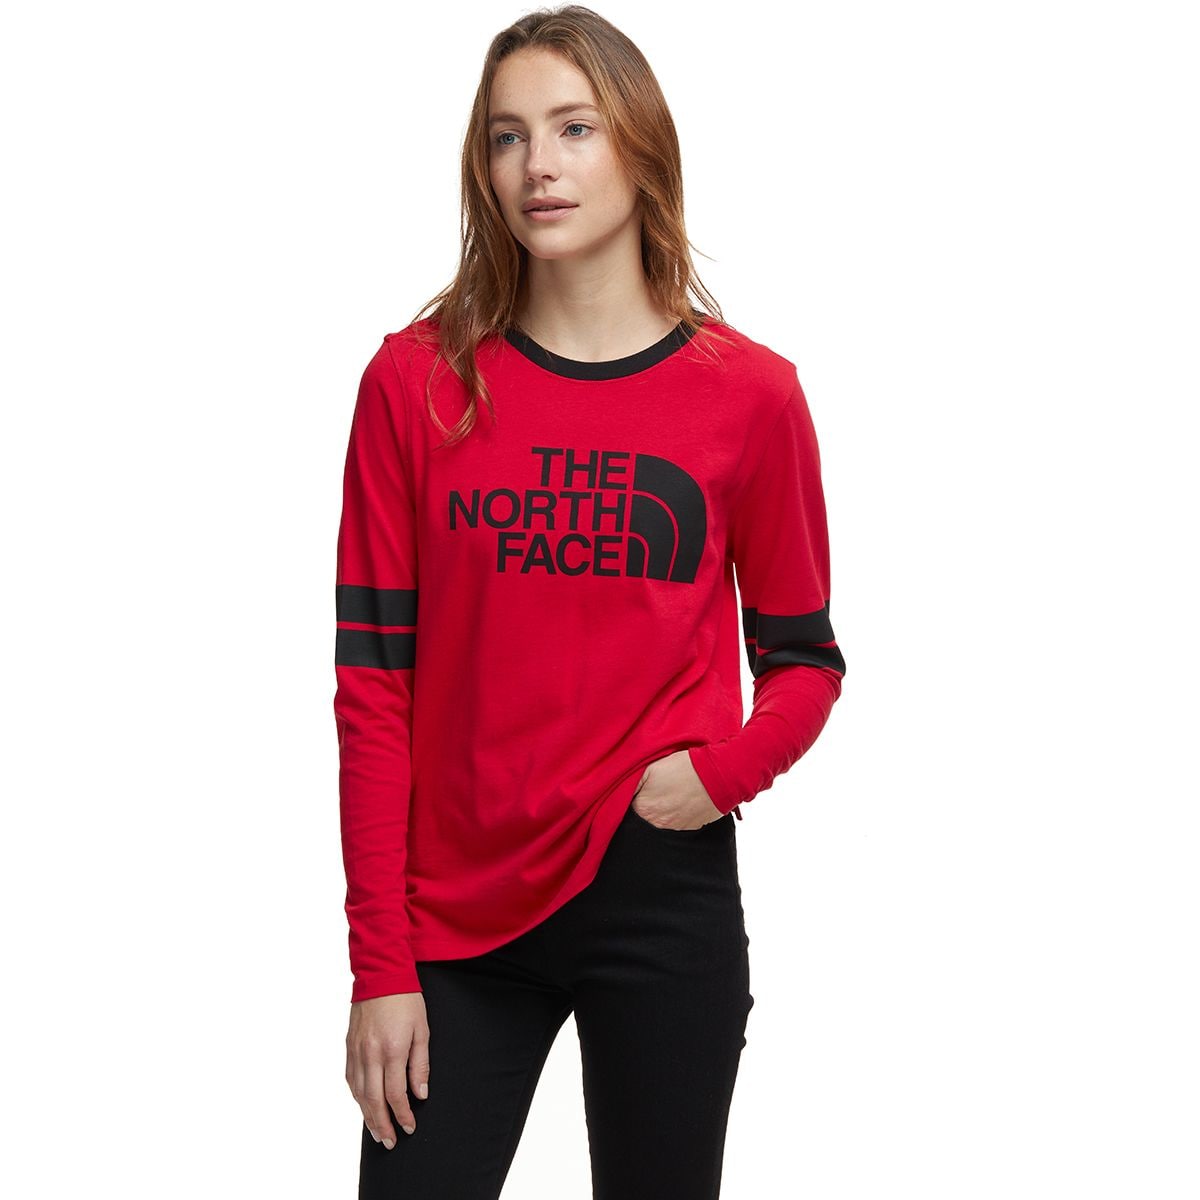 The North Face Collegiate Long-Sleeve T-Shirt - Women's - Clothing